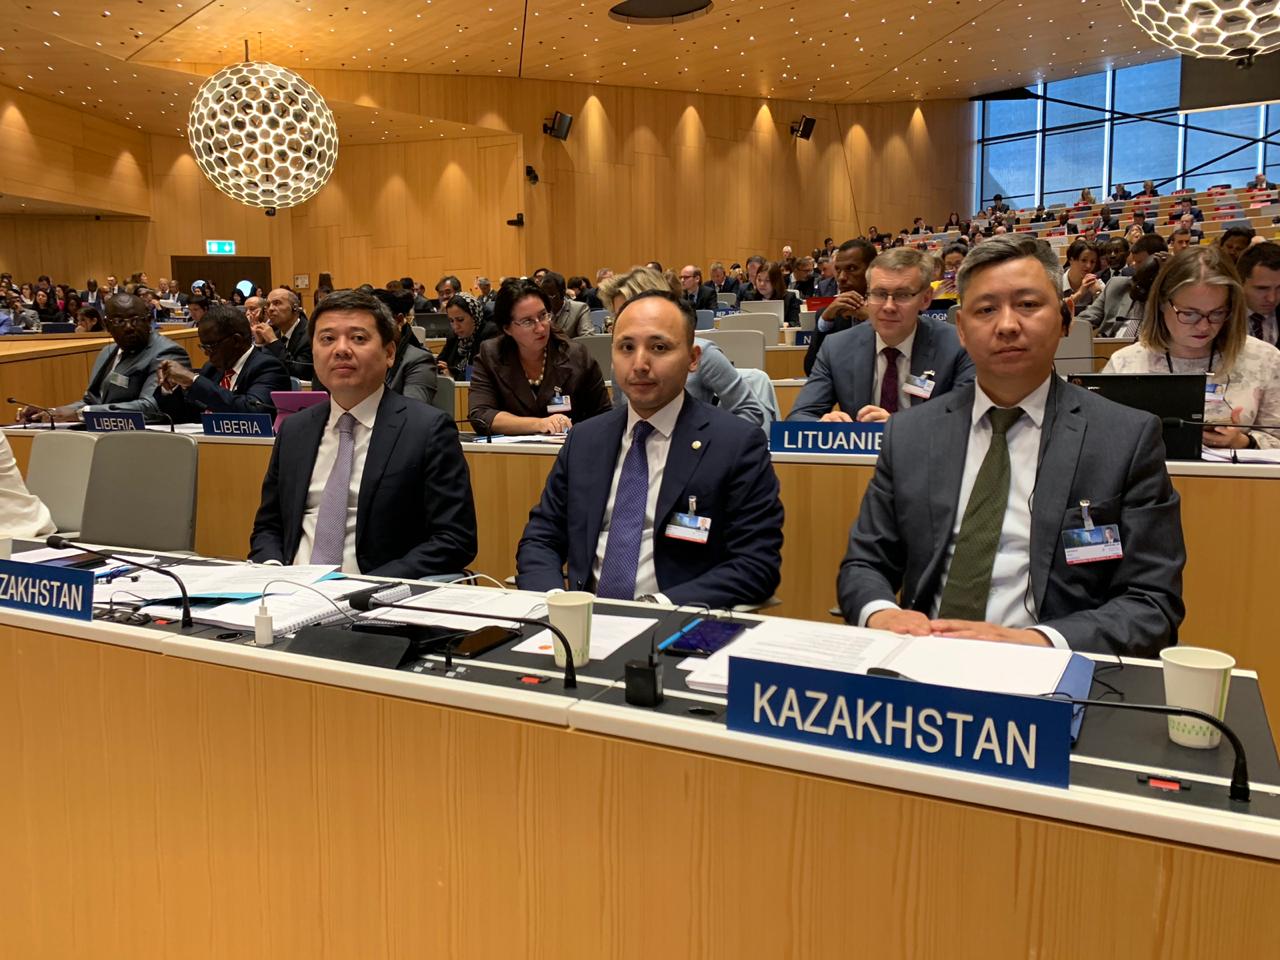 Kazakhstan attends 59th session of the General Assembly of the WIPO